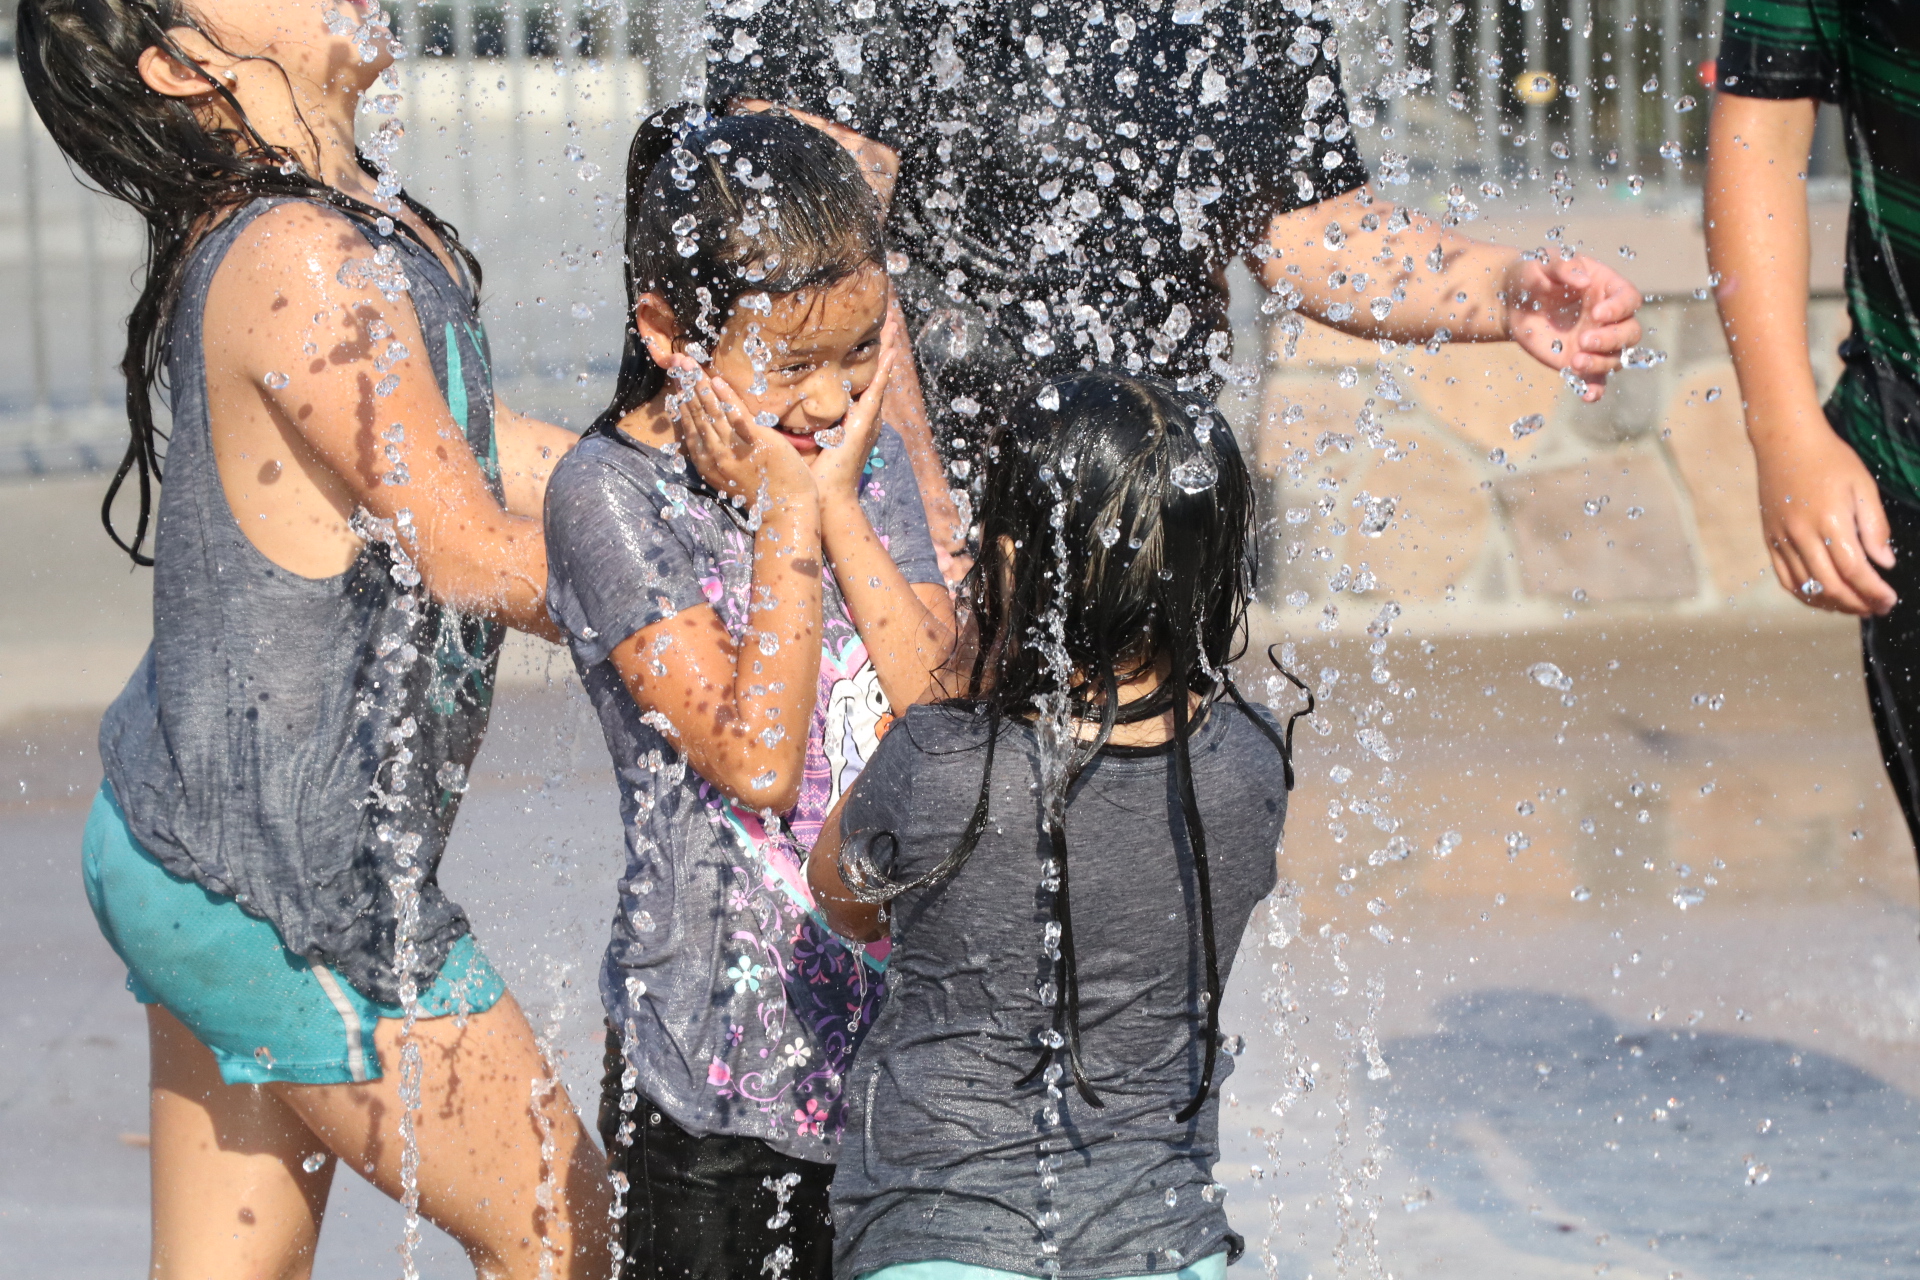 Taking advantage of ‘cooling centers’, Inland residents escape heat